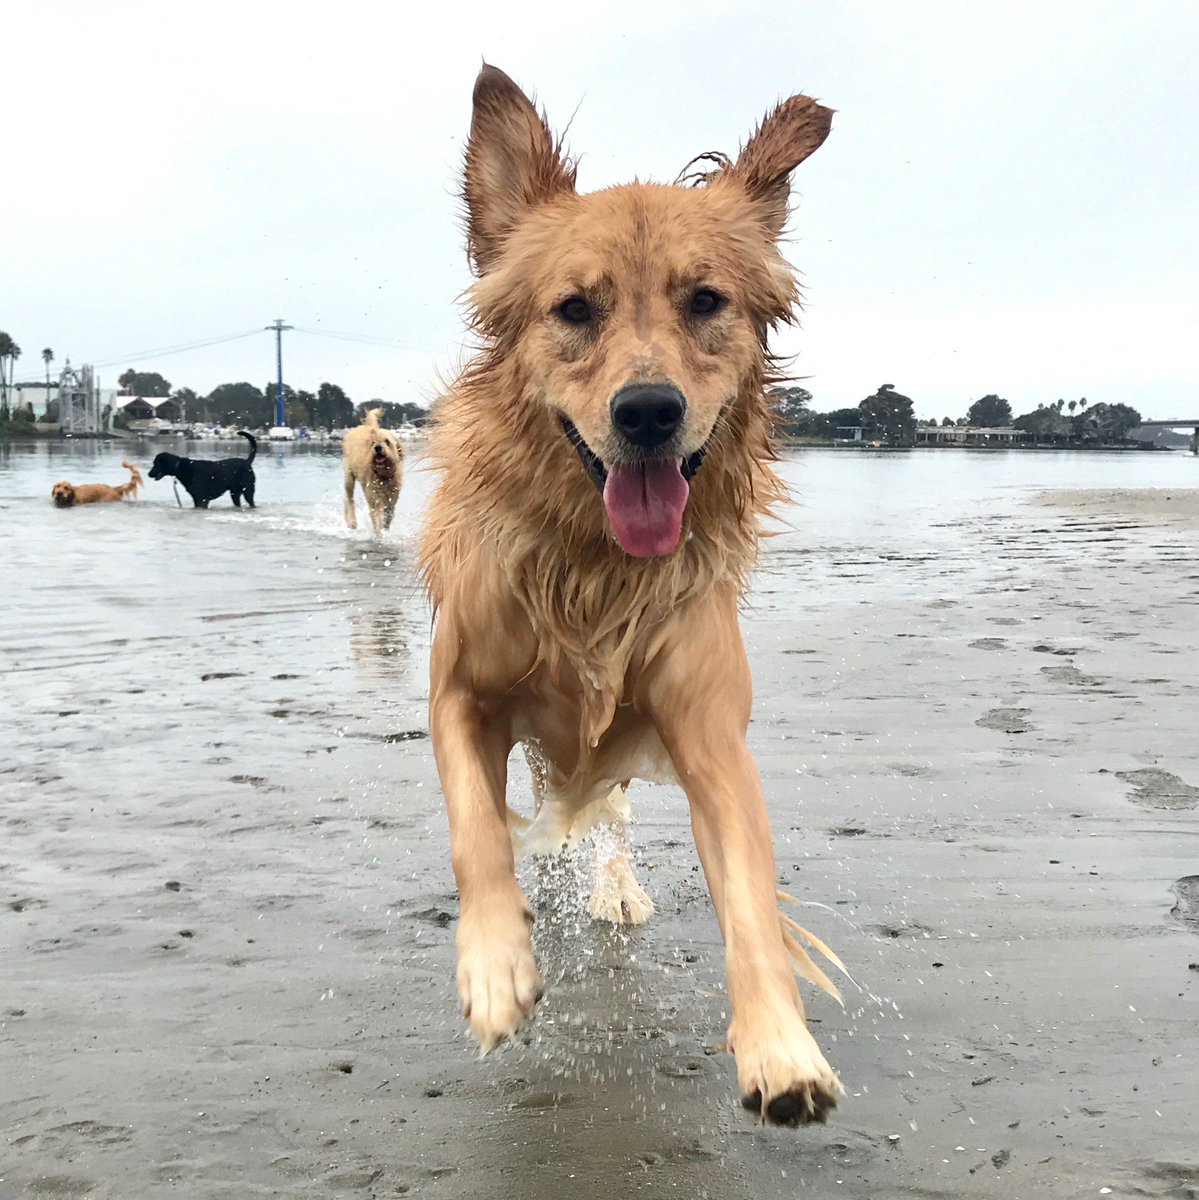 Meet Avery! She's one of our beautiful Goldens <3 What a perfect #TongueOutTuesday !      

#TOT #DogTired #DogBeachLife #HappiestPlaceOnEarth #LifesToughGetADog #BarkAtUs #GoldensOfInsta #InstaDog #Fun #DailyDogs #MakingNewFriends